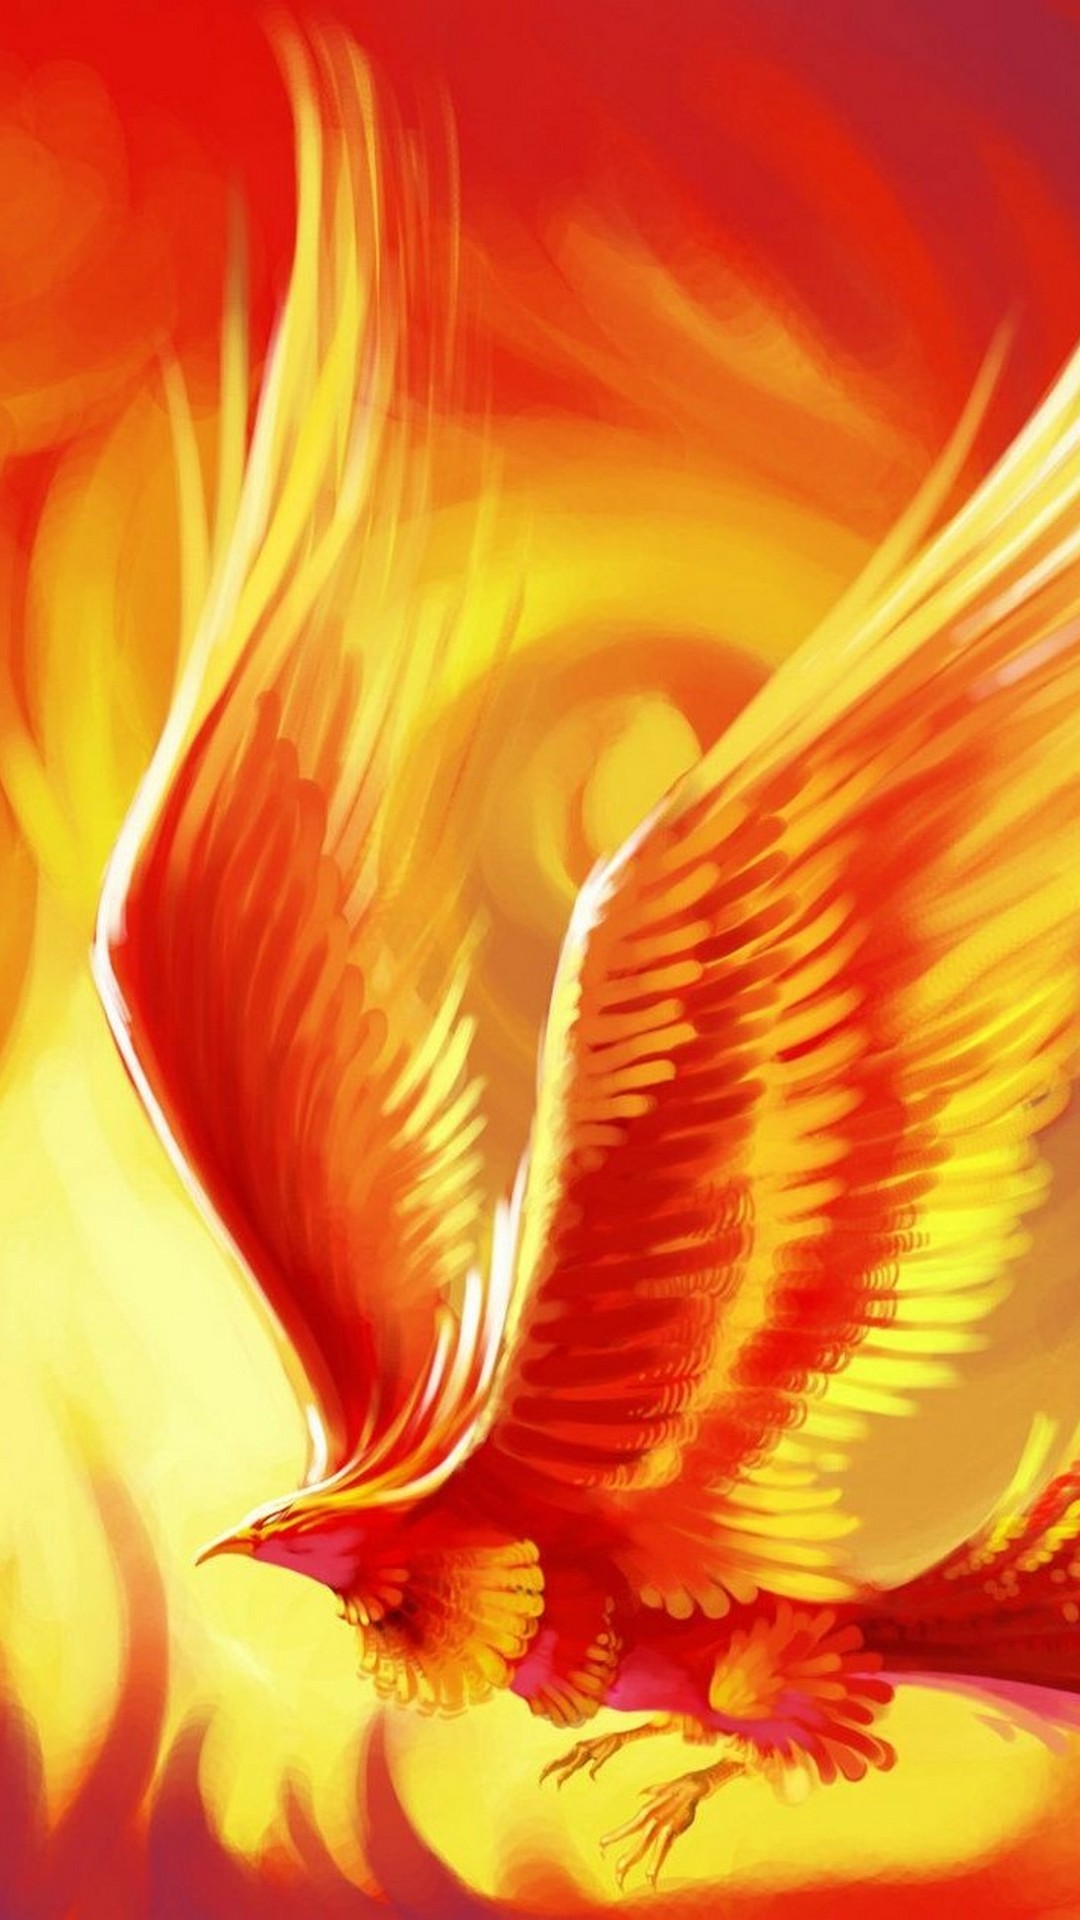 iPhone Wallpaper Phoenix Images with image resolution 1080x1920 pixel. You can make this wallpaper for your iPhone 5, 6, 7, 8, X backgrounds, Mobile Screensaver, or iPad Lock Screen